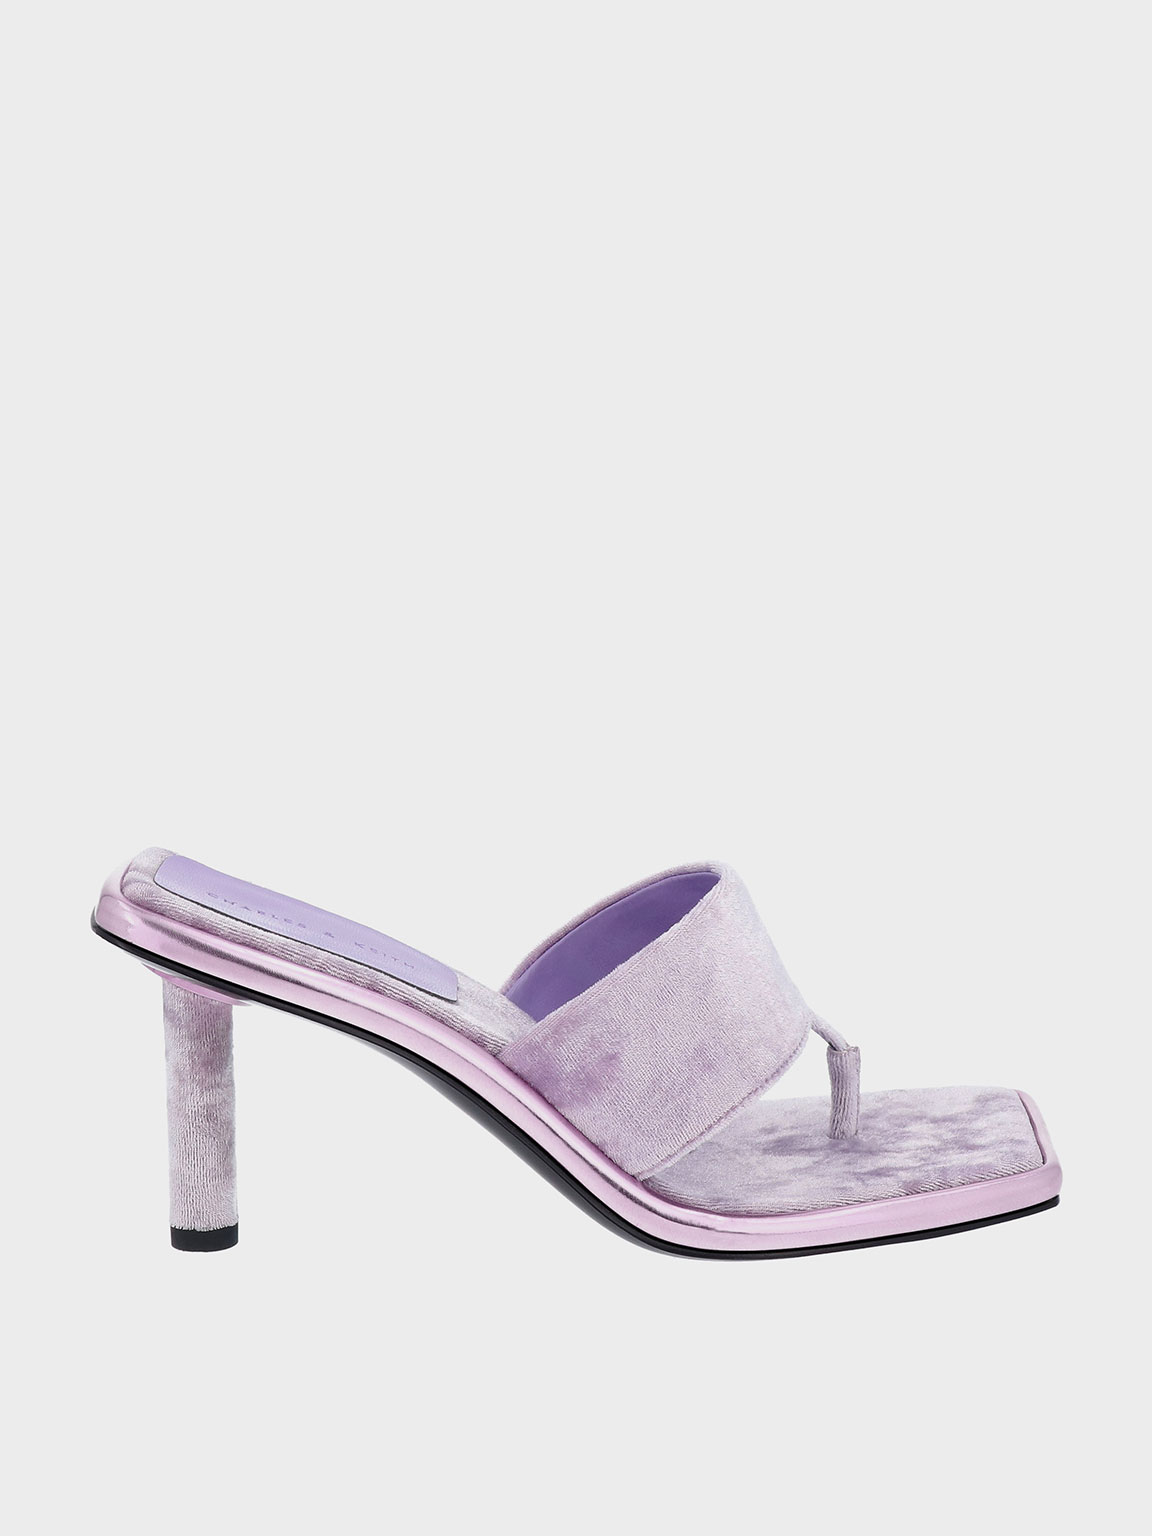 The 25 Best Purple Heels That Are Chic and Affordable | Who What Wear